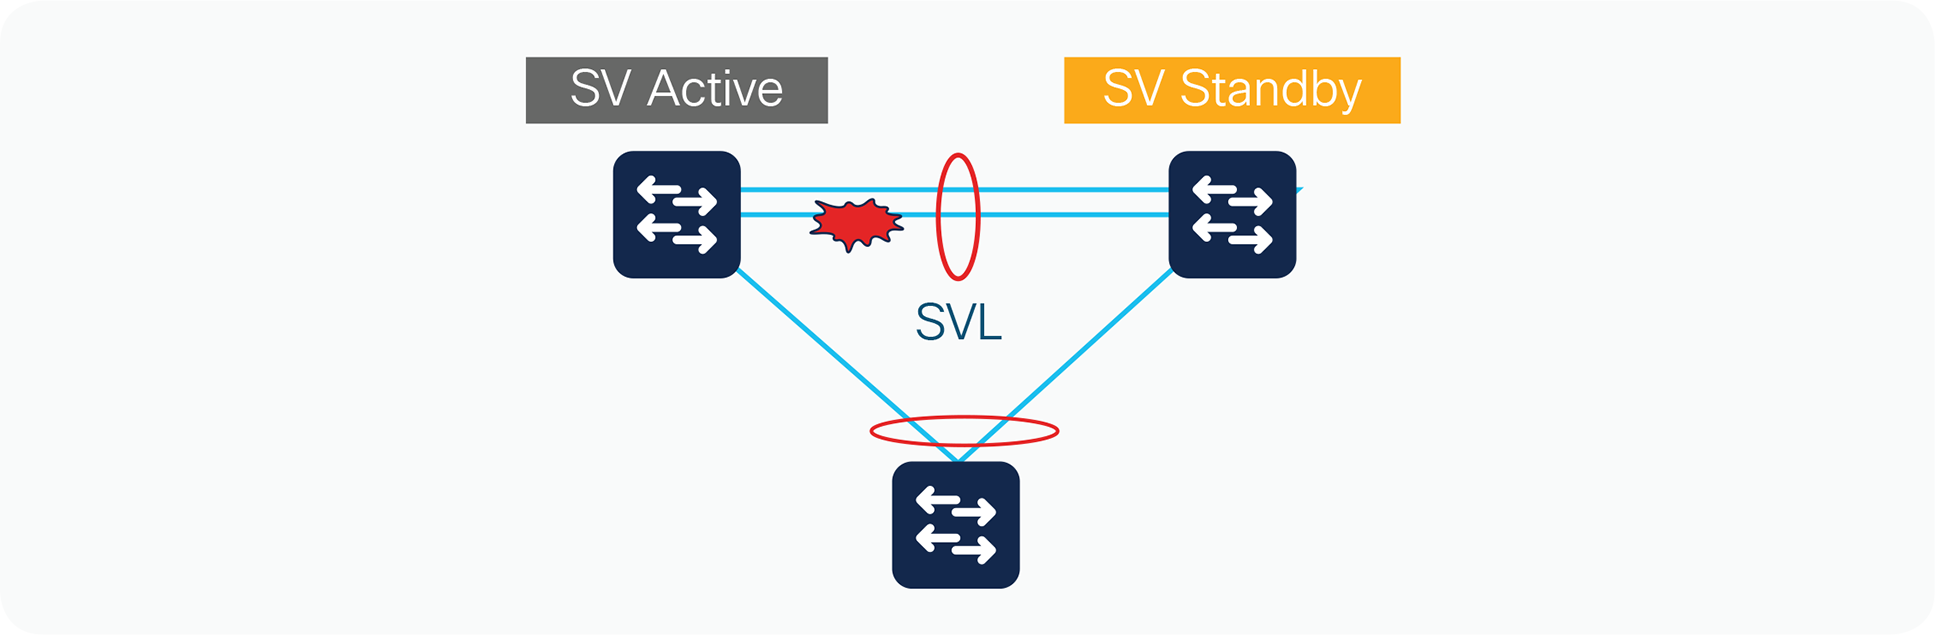 StackWise Virtual link failure